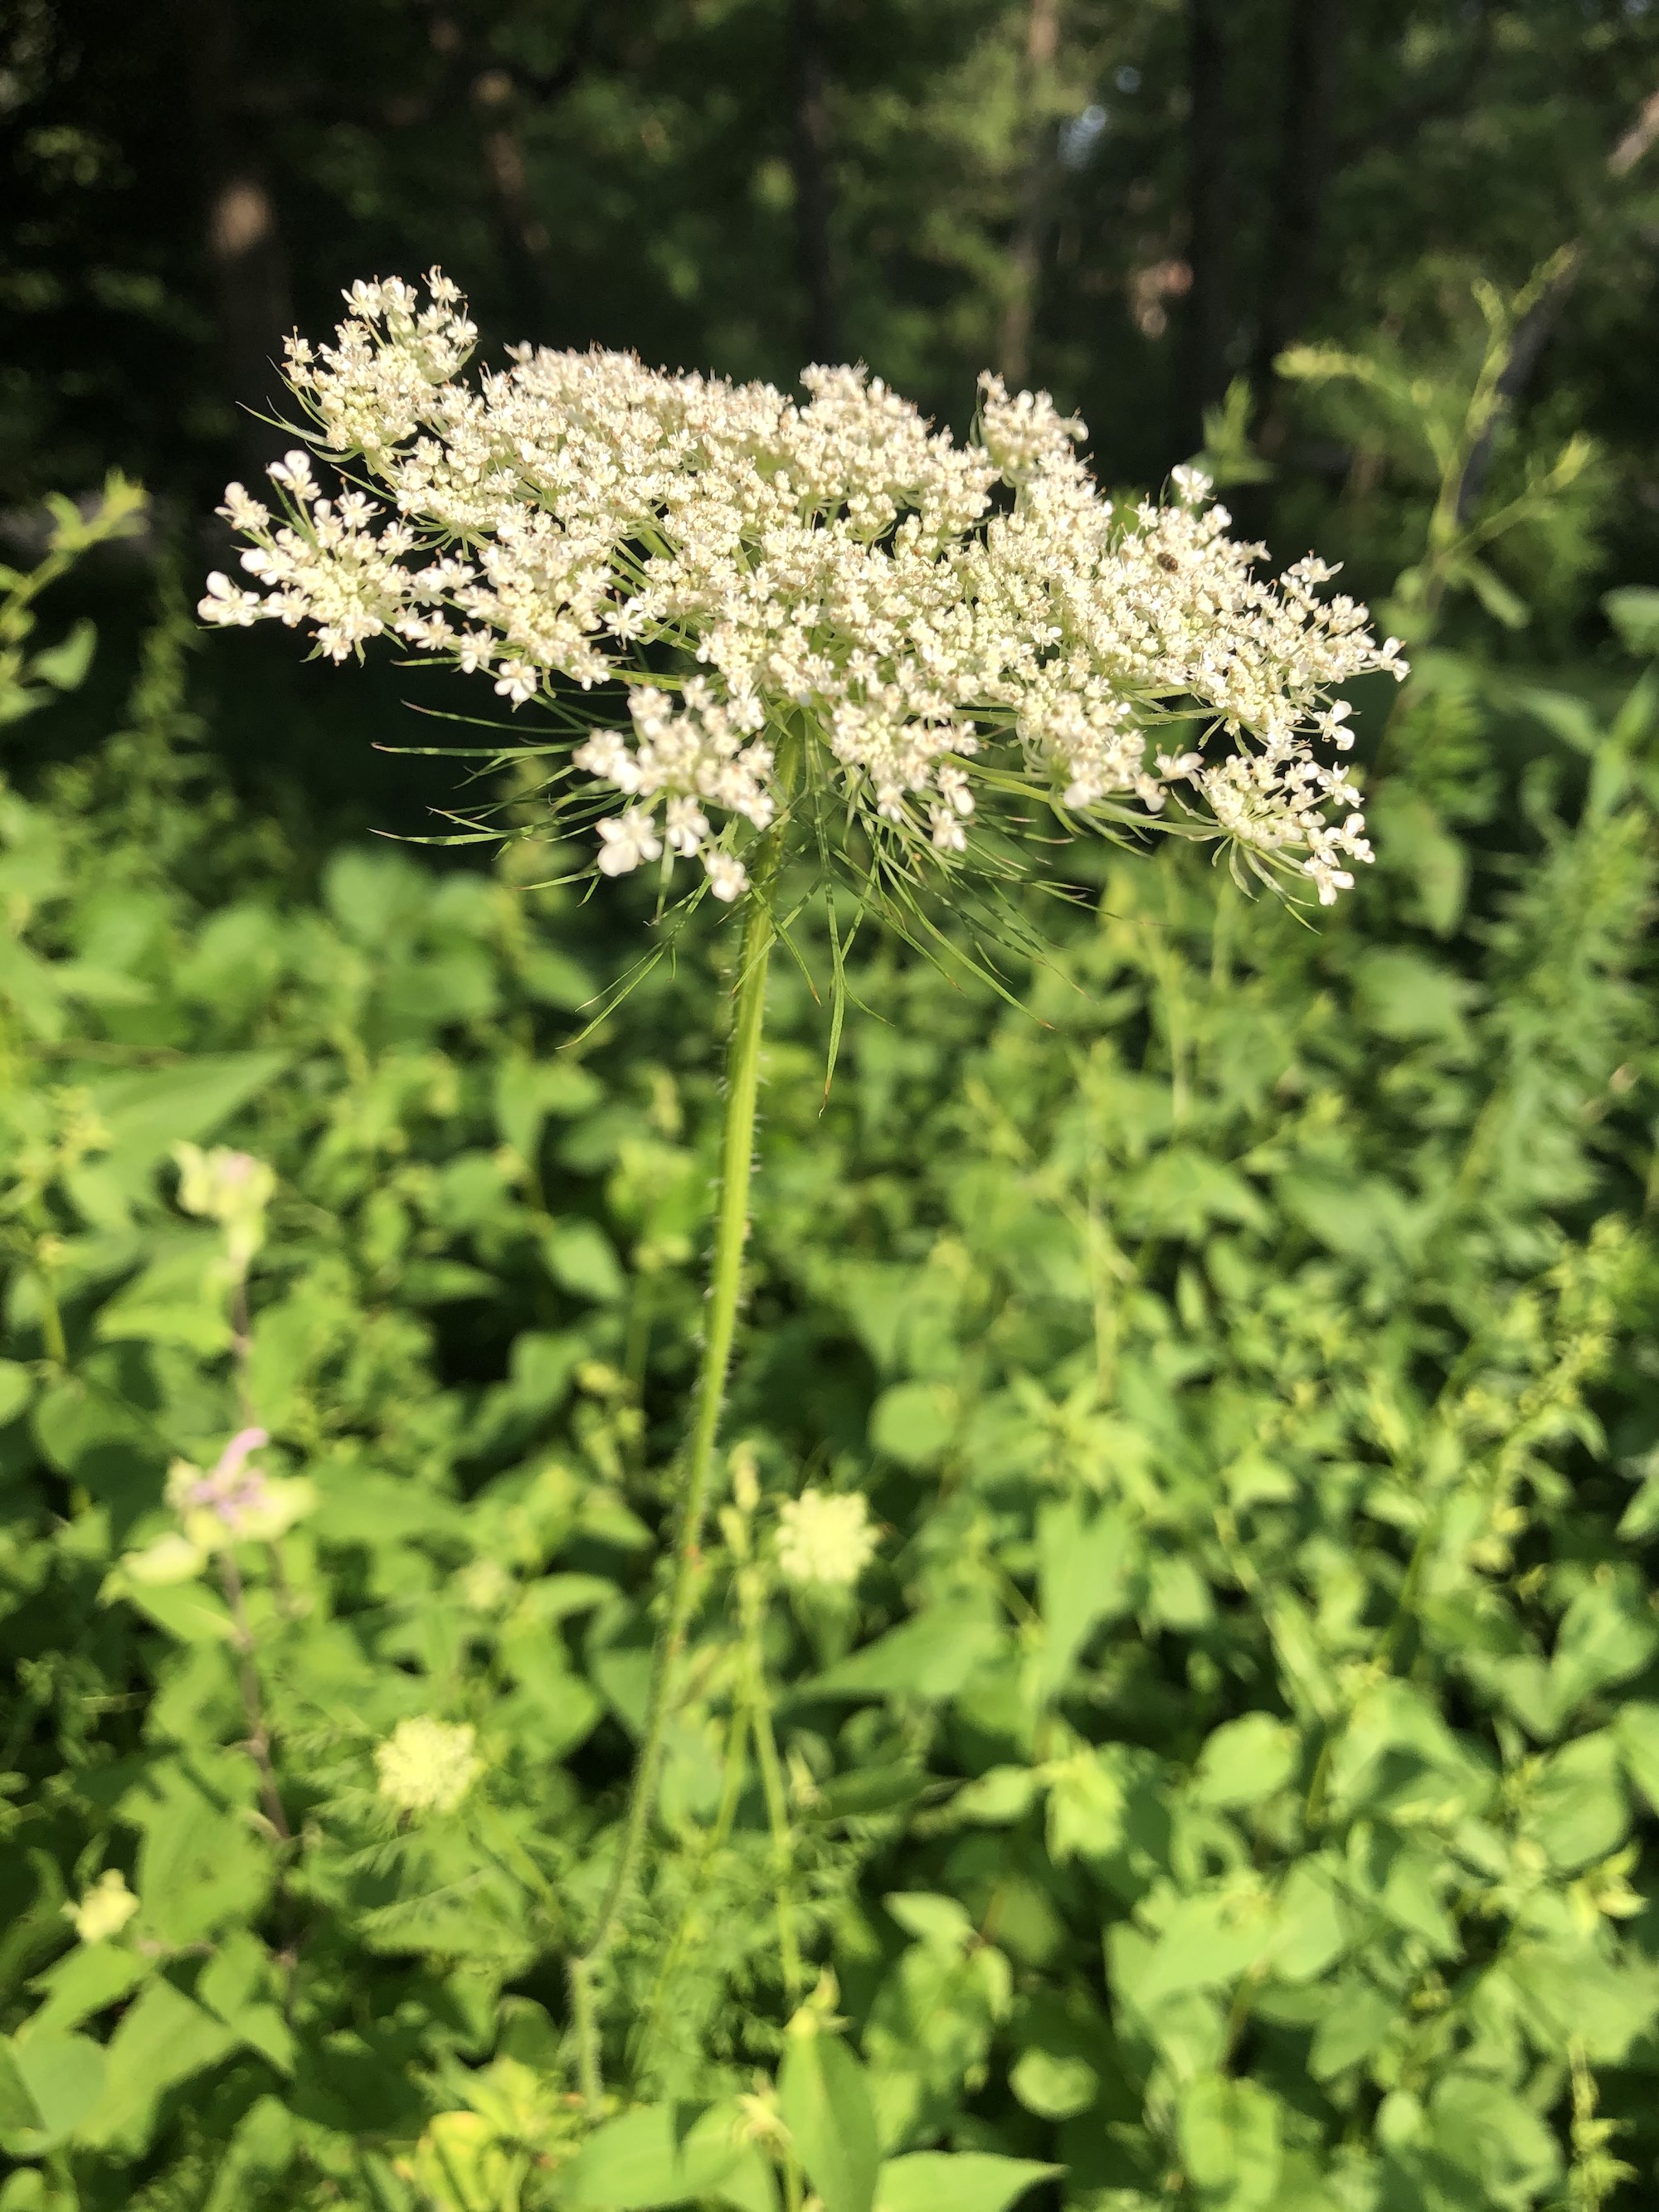 Queen Anne's Lace in Nakoma Park in Madison, WI on July 9, 2020.